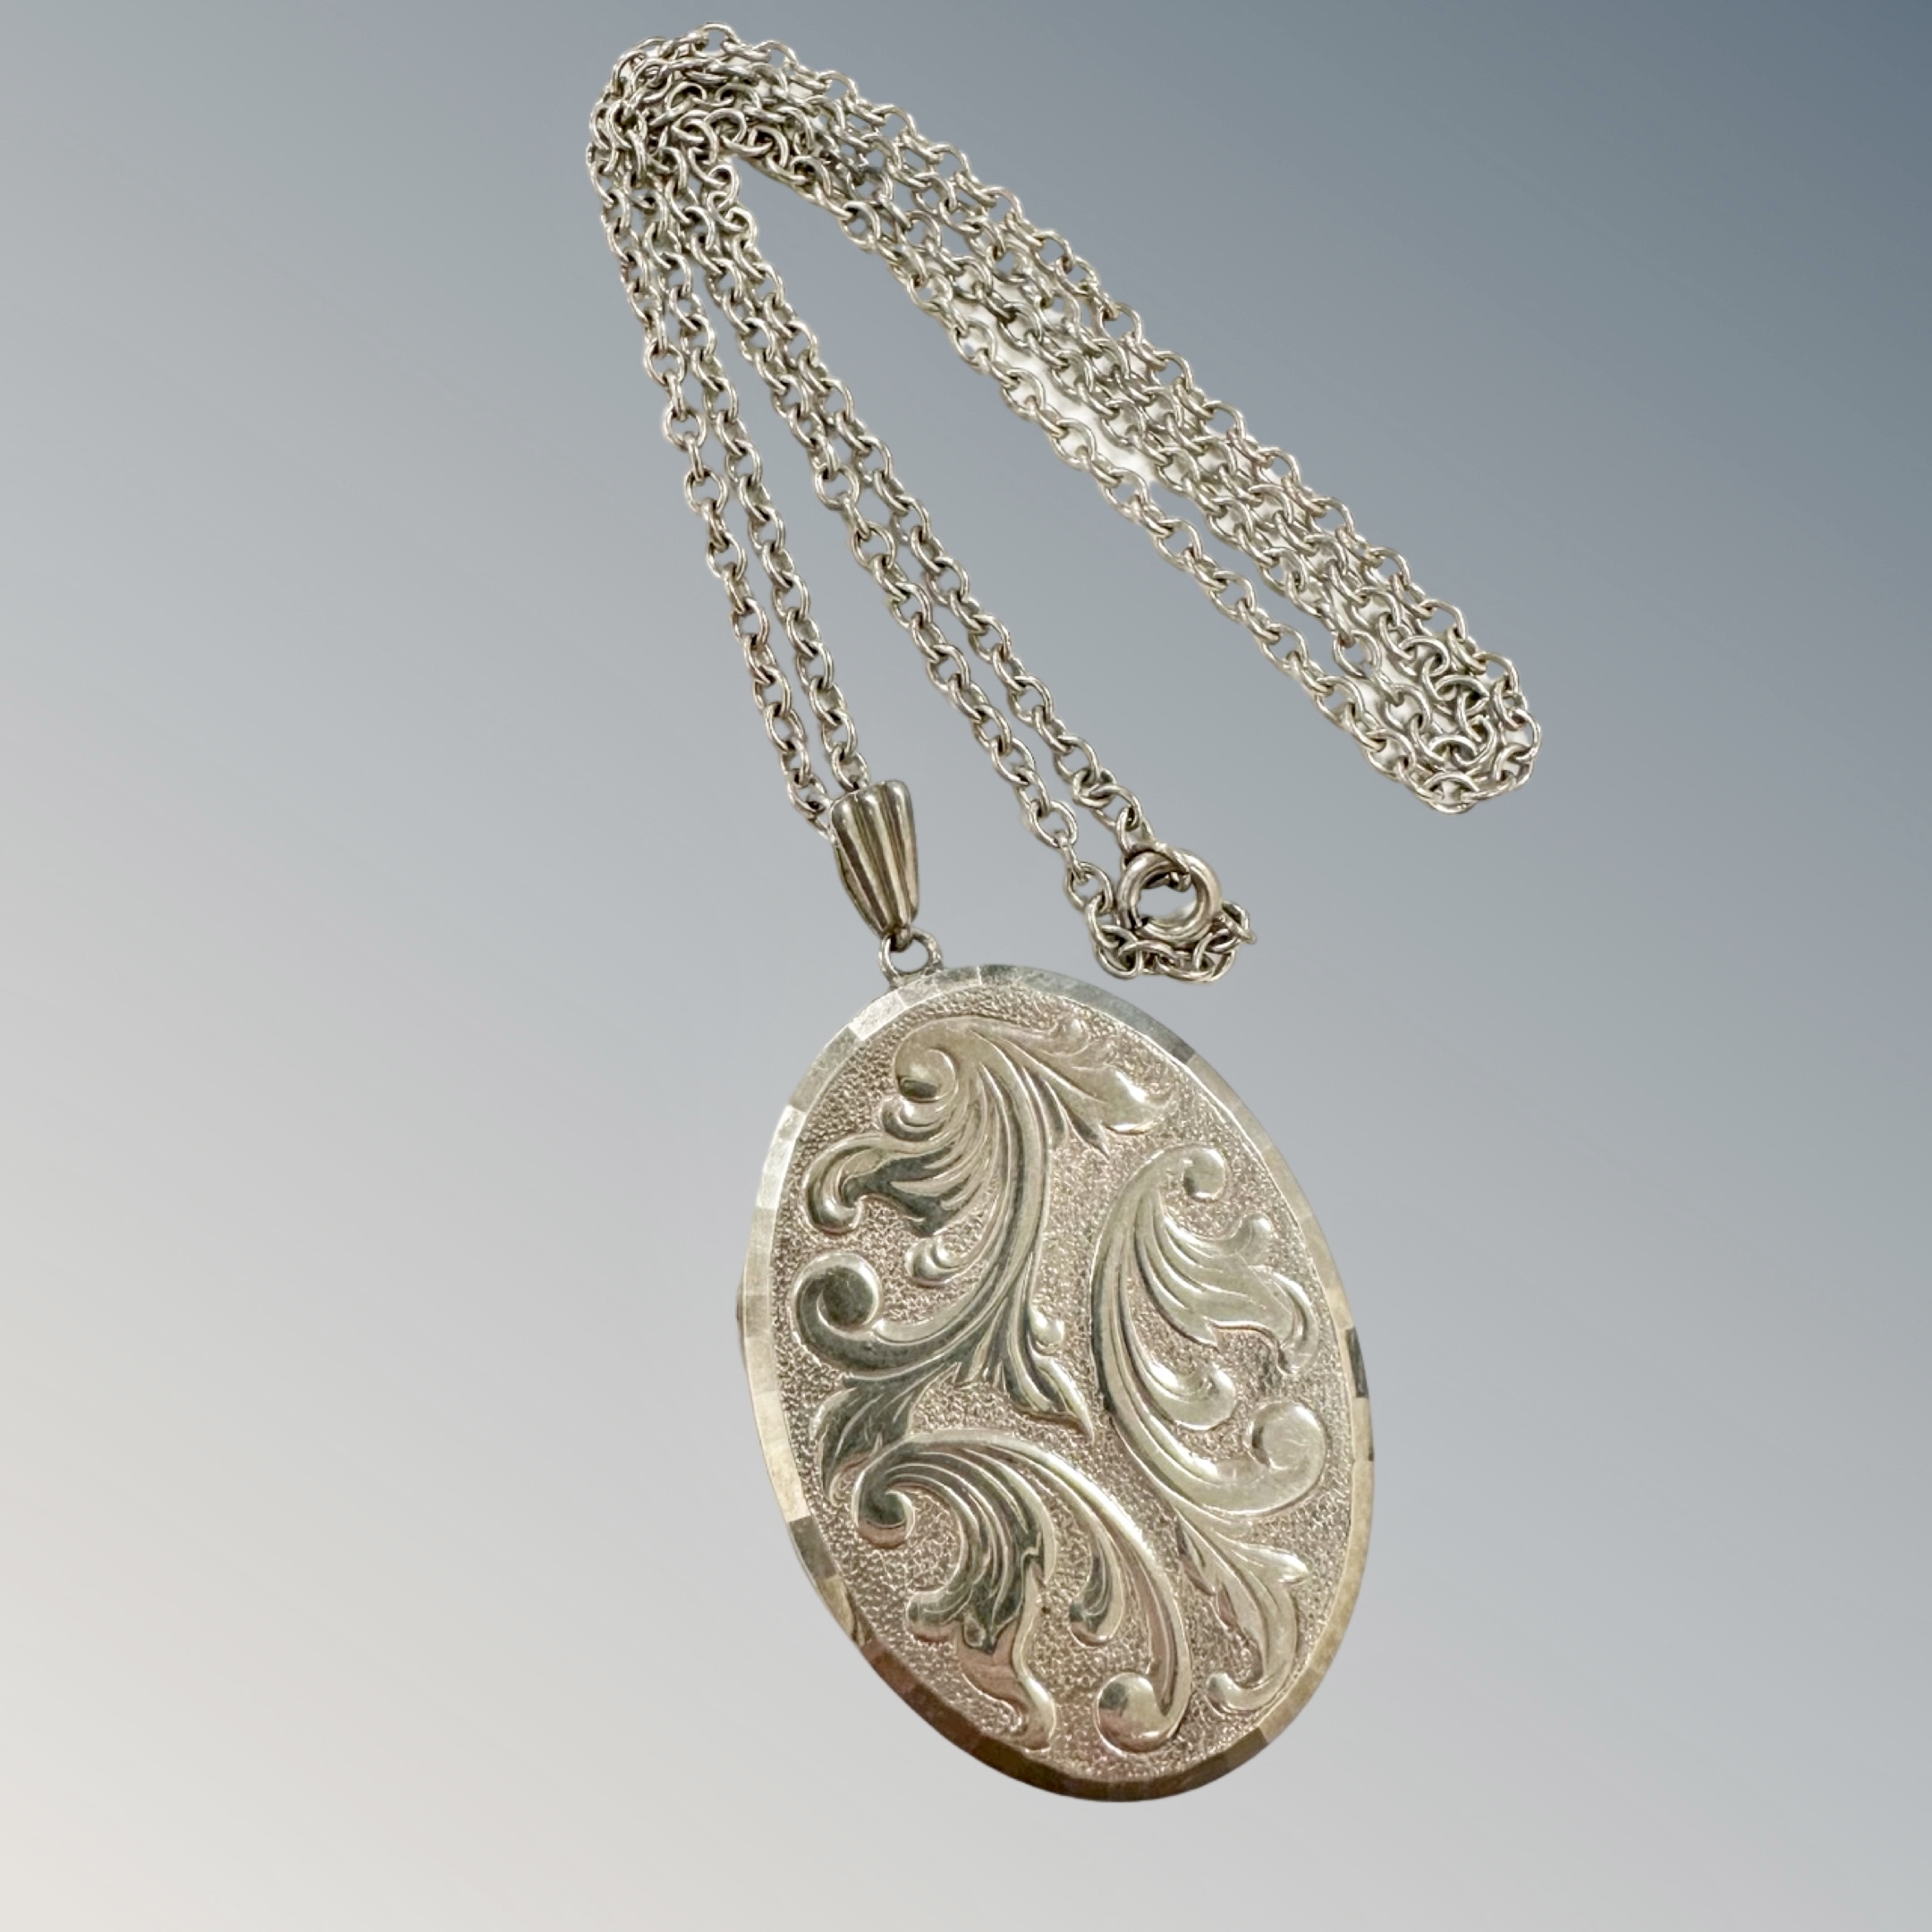 A large silver locket and chain